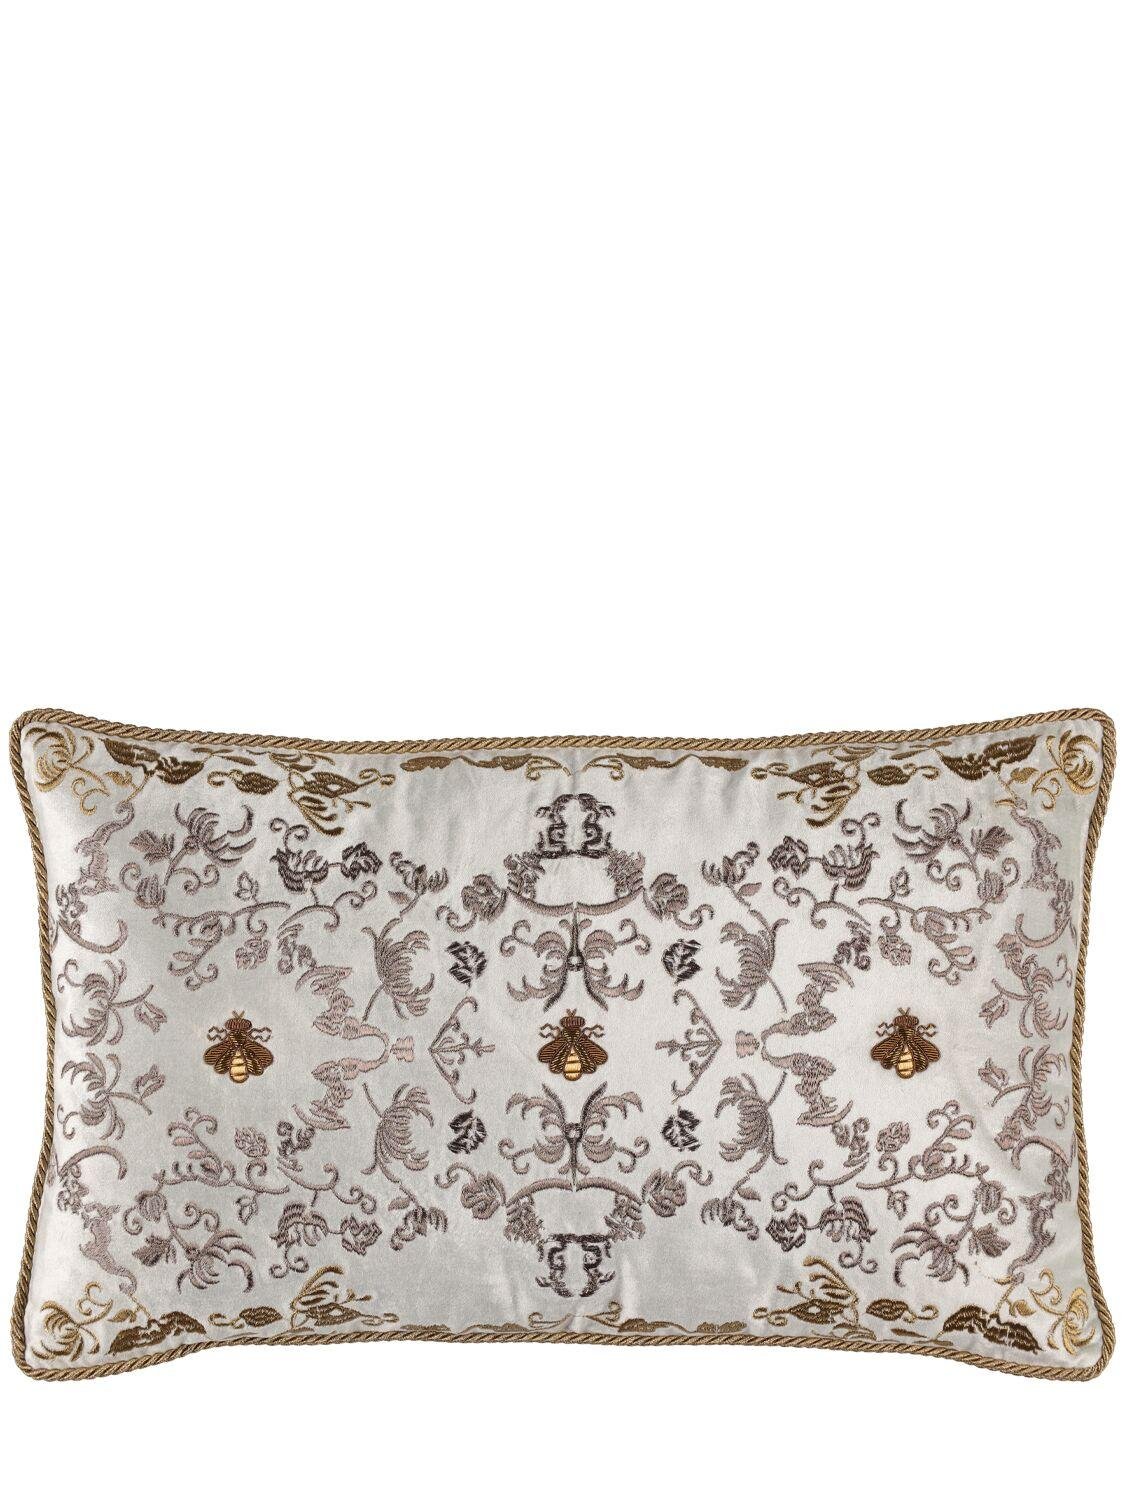 Embroidered Velvet Cushion by LES OTTOMANS